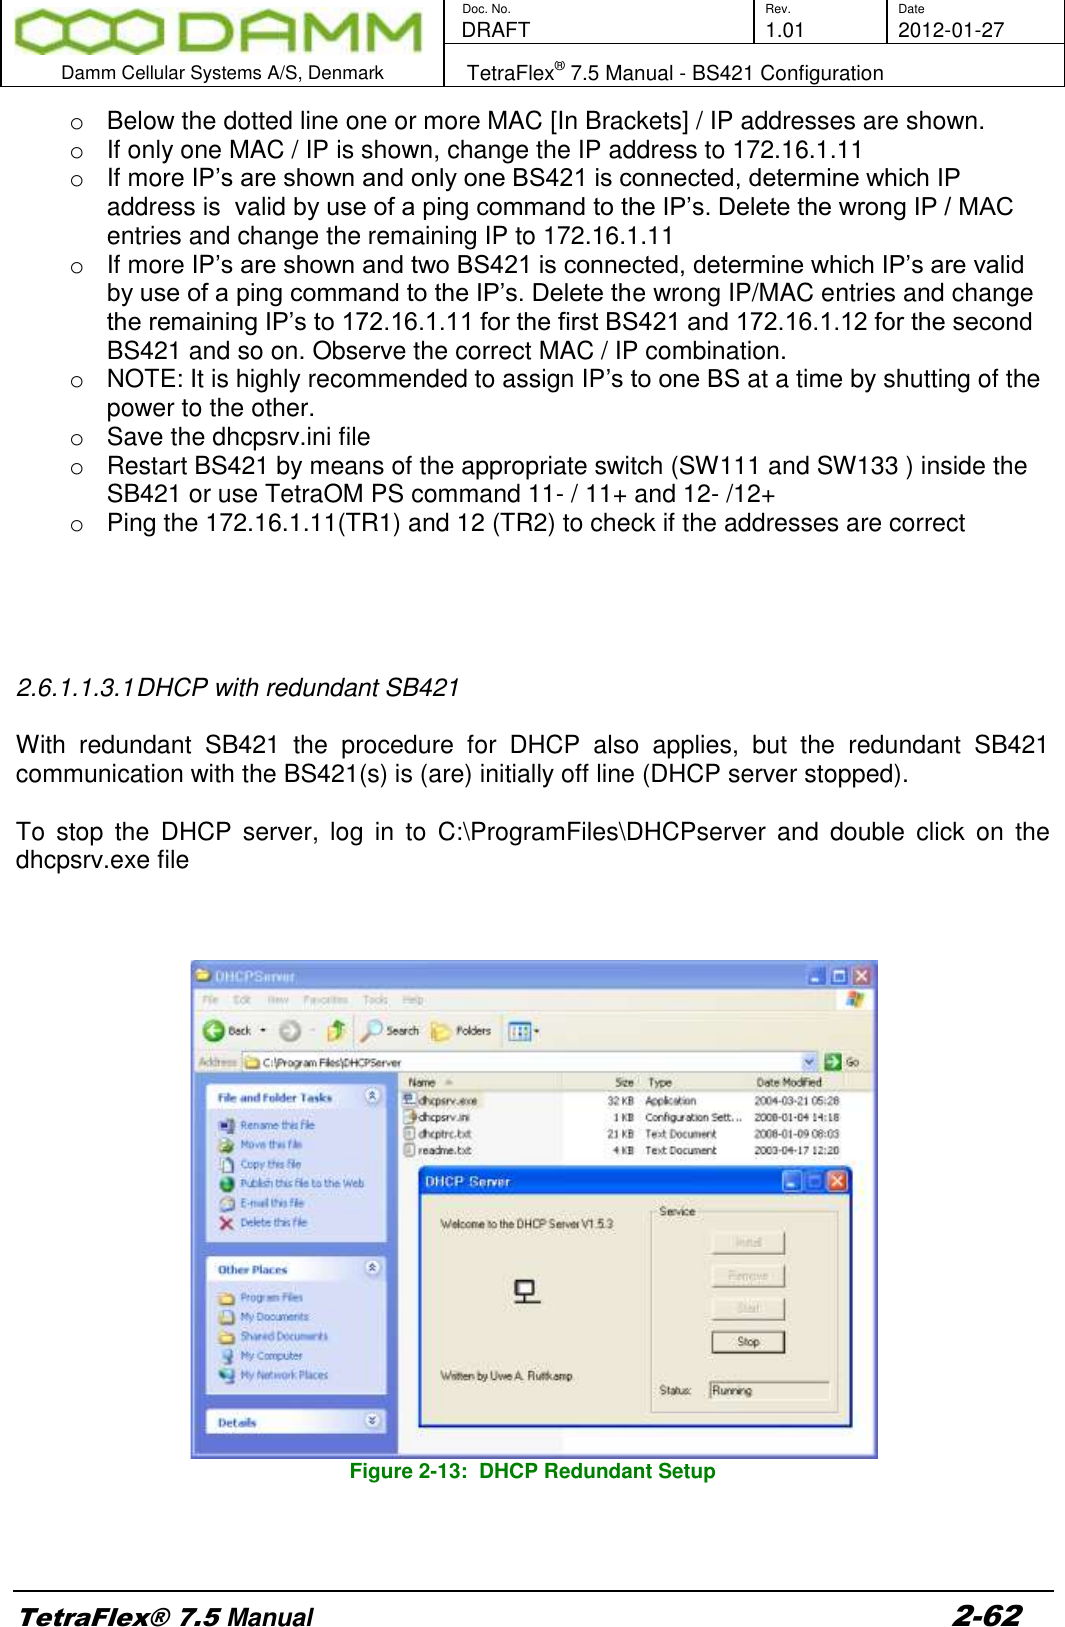        Doc. No. Rev. Date    DRAFT  1.01 2012-01-27  Damm Cellular Systems A/S, Denmark   TetraFlex® 7.5 Manual - BS421 Configuration  TetraFlex® 7.5 Manual 2-62 o  Below the dotted line one or more MAC [In Brackets] / IP addresses are shown. o  If only one MAC / IP is shown, change the IP address to 172.16.1.11   o  If more IP’s are shown and only one BS421 is connected, determine which IP address is  valid by use of a ping command to the IP’s. Delete the wrong IP / MAC entries and change the remaining IP to 172.16.1.11 o  If more IP’s are shown and two BS421 is connected, determine which IP’s are valid by use of a ping command to the IP’s. Delete the wrong IP/MAC entries and change the remaining IP’s to 172.16.1.11 for the first BS421 and 172.16.1.12 for the second BS421 and so on. Observe the correct MAC / IP combination. o  NOTE: It is highly recommended to assign IP’s to one BS at a time by shutting of the power to the other. o  Save the dhcpsrv.ini file o  Restart BS421 by means of the appropriate switch (SW111 and SW133 ) inside the SB421 or use TetraOM PS command 11- / 11+ and 12- /12+ o  Ping the 172.16.1.11(TR1) and 12 (TR2) to check if the addresses are correct     2.6.1.1.3.1 DHCP with redundant SB421  With  redundant  SB421  the  procedure  for  DHCP  also  applies,  but  the  redundant  SB421 communication with the BS421(s) is (are) initially off line (DHCP server stopped).  To  stop  the  DHCP  server,  log  in  to  C:\ProgramFiles\DHCPserver  and  double  click  on  the dhcpsrv.exe file      Figure 2-13:  DHCP Redundant Setup     